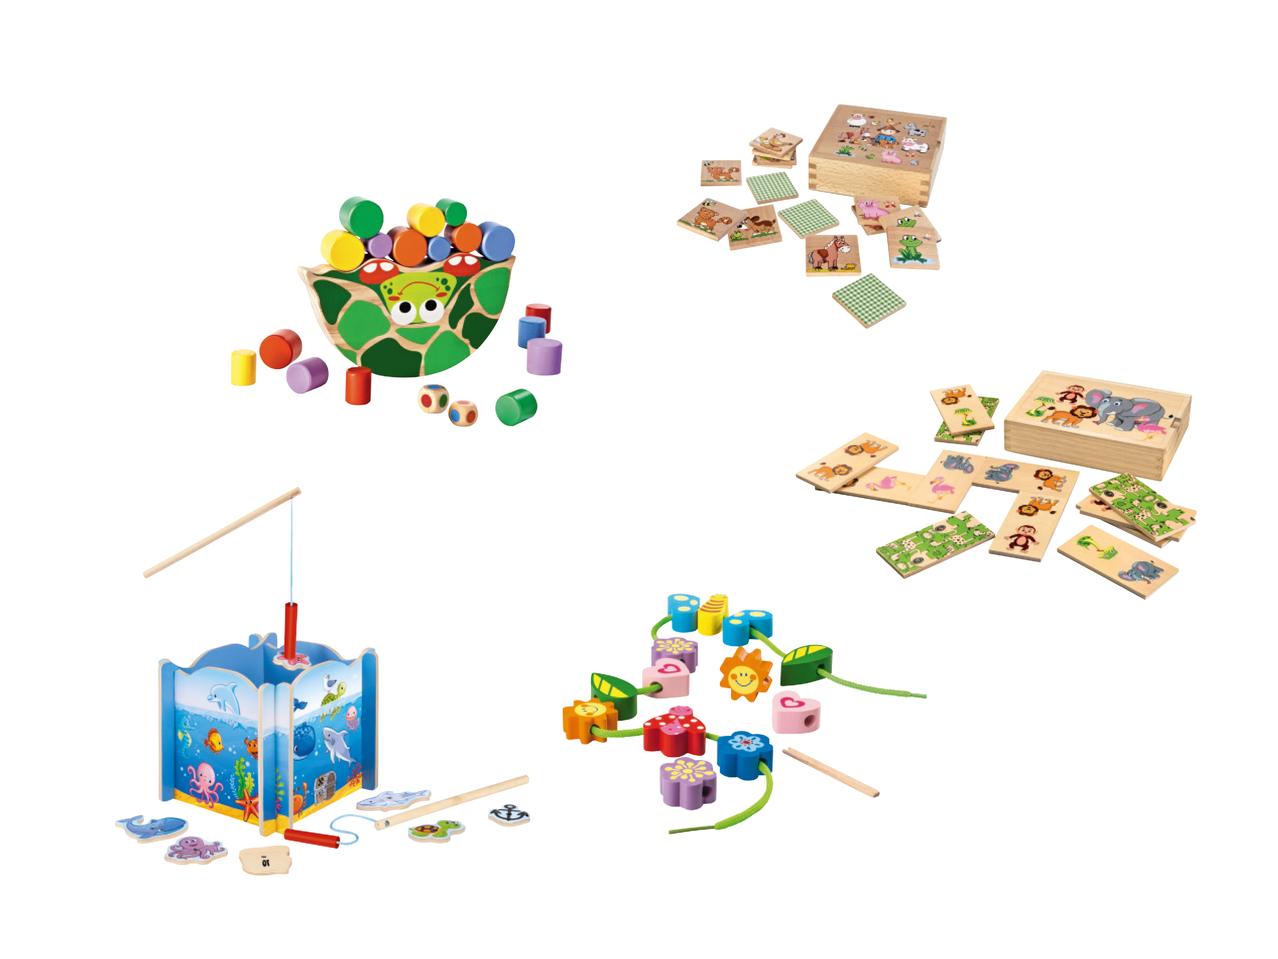 PLAYTIVE JUNIOR Wooden Toys and Games